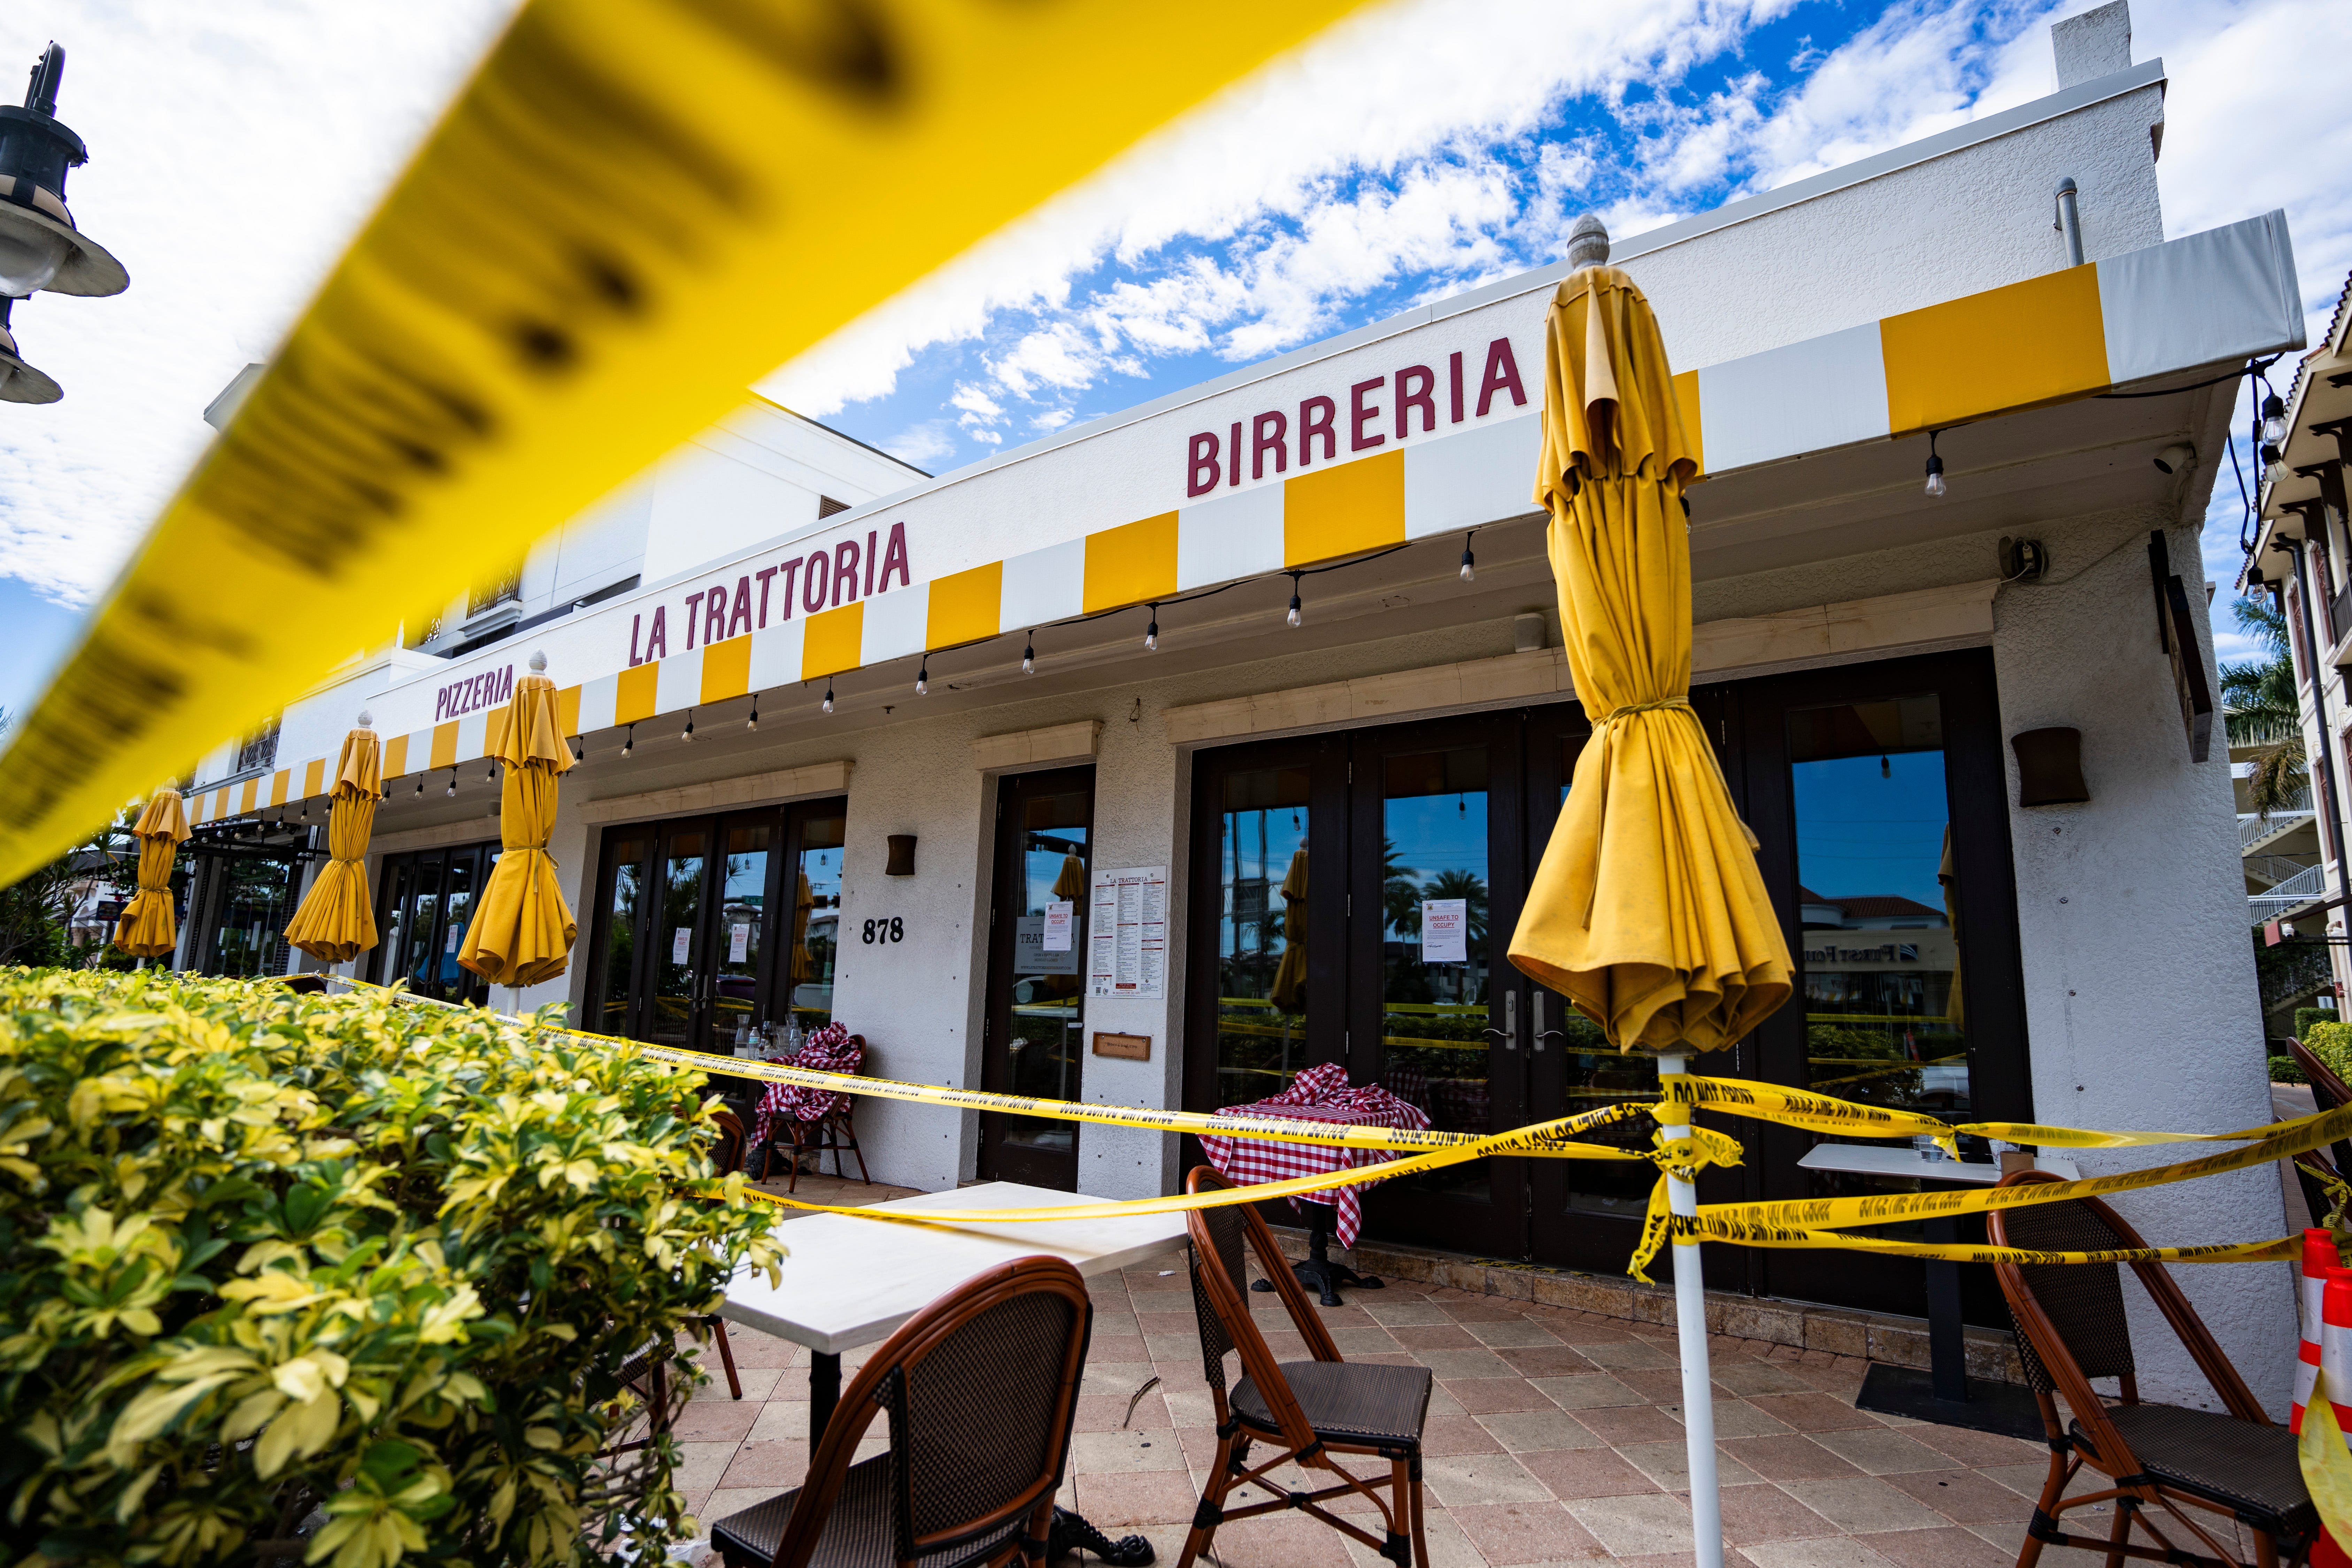 La Trattoria ceiling collapse probe begins in Naples; hospital provides update on victims